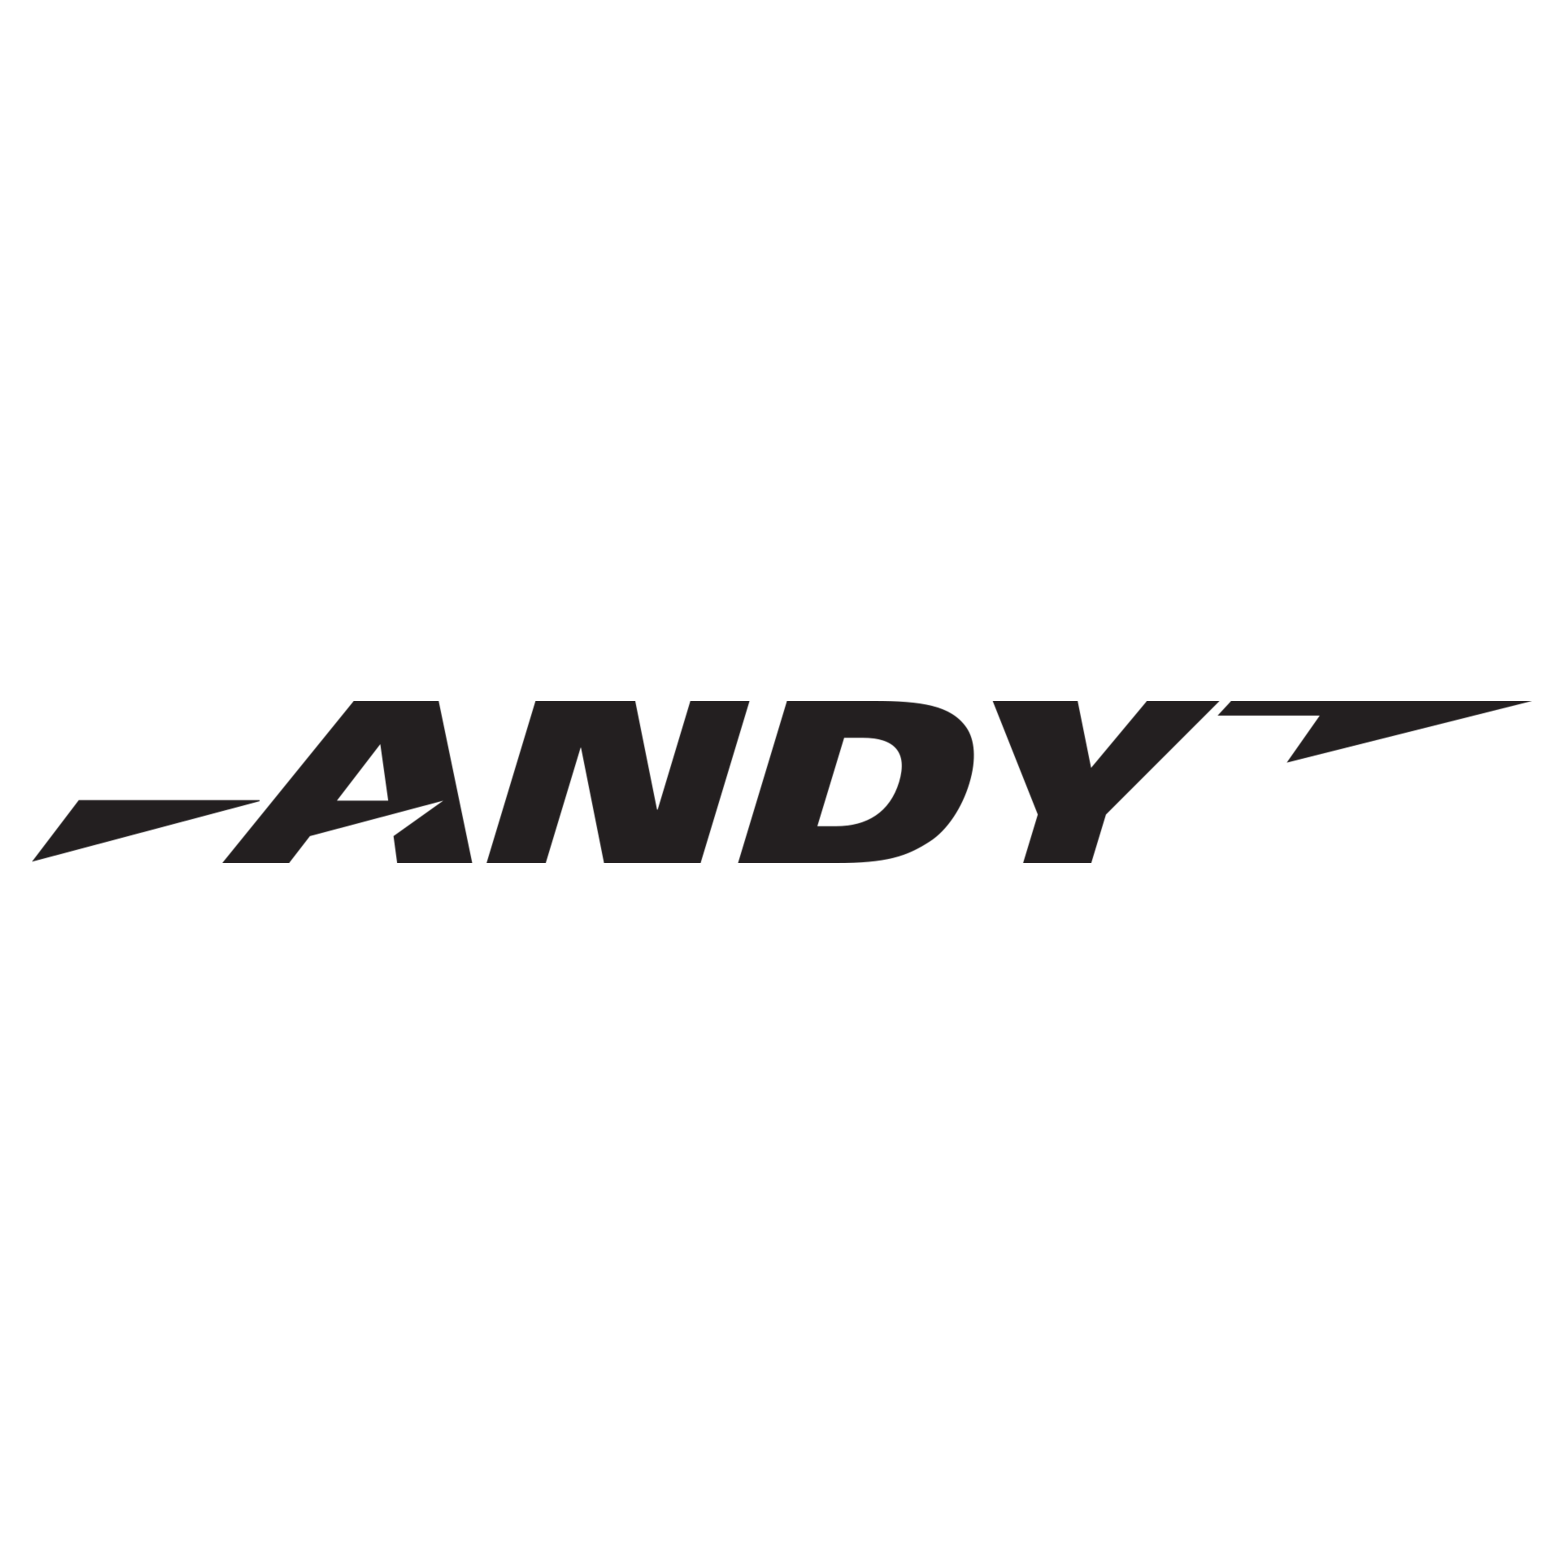 Professional Services Andy Transport Social T Social Media Marketing Agency Digital Strategy Services Canada.png